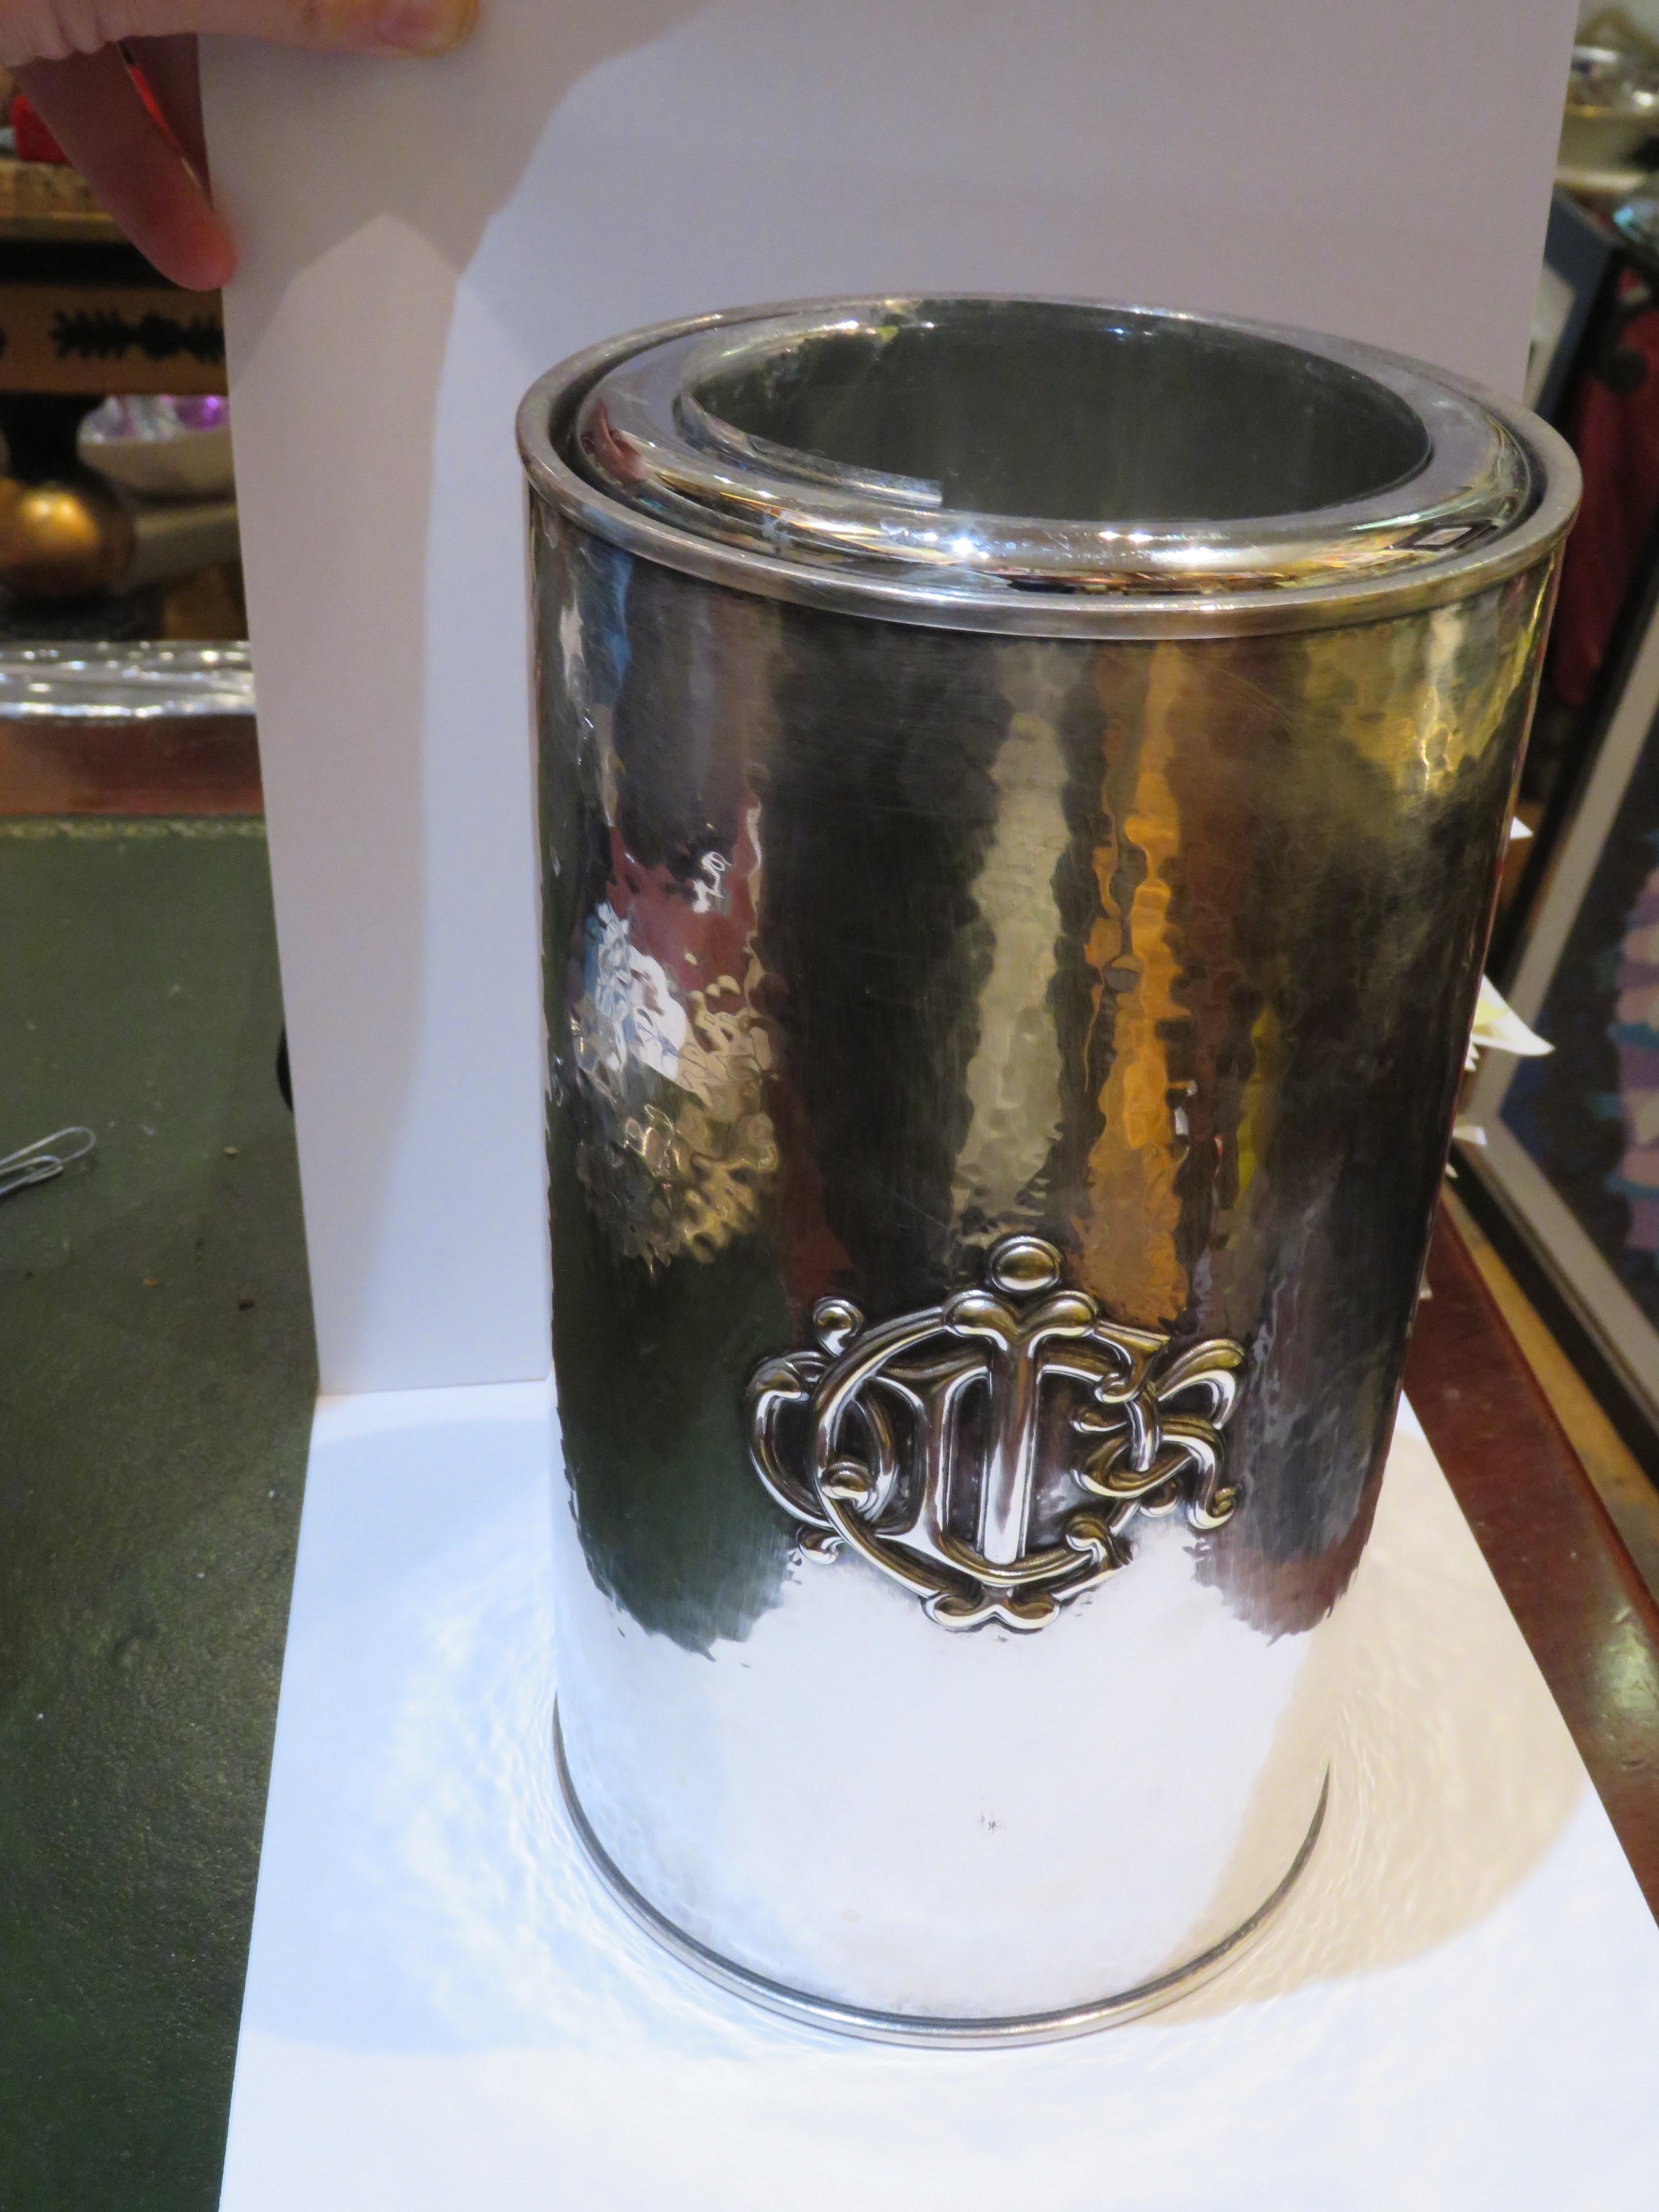 The Following Item we are offering is a Rare Magnificent Heavy Impressive Antique Original Christian Dior Silver Plate Large Wine Holder. Remarkably done in a Fine Outstanding Manner with Two Large 